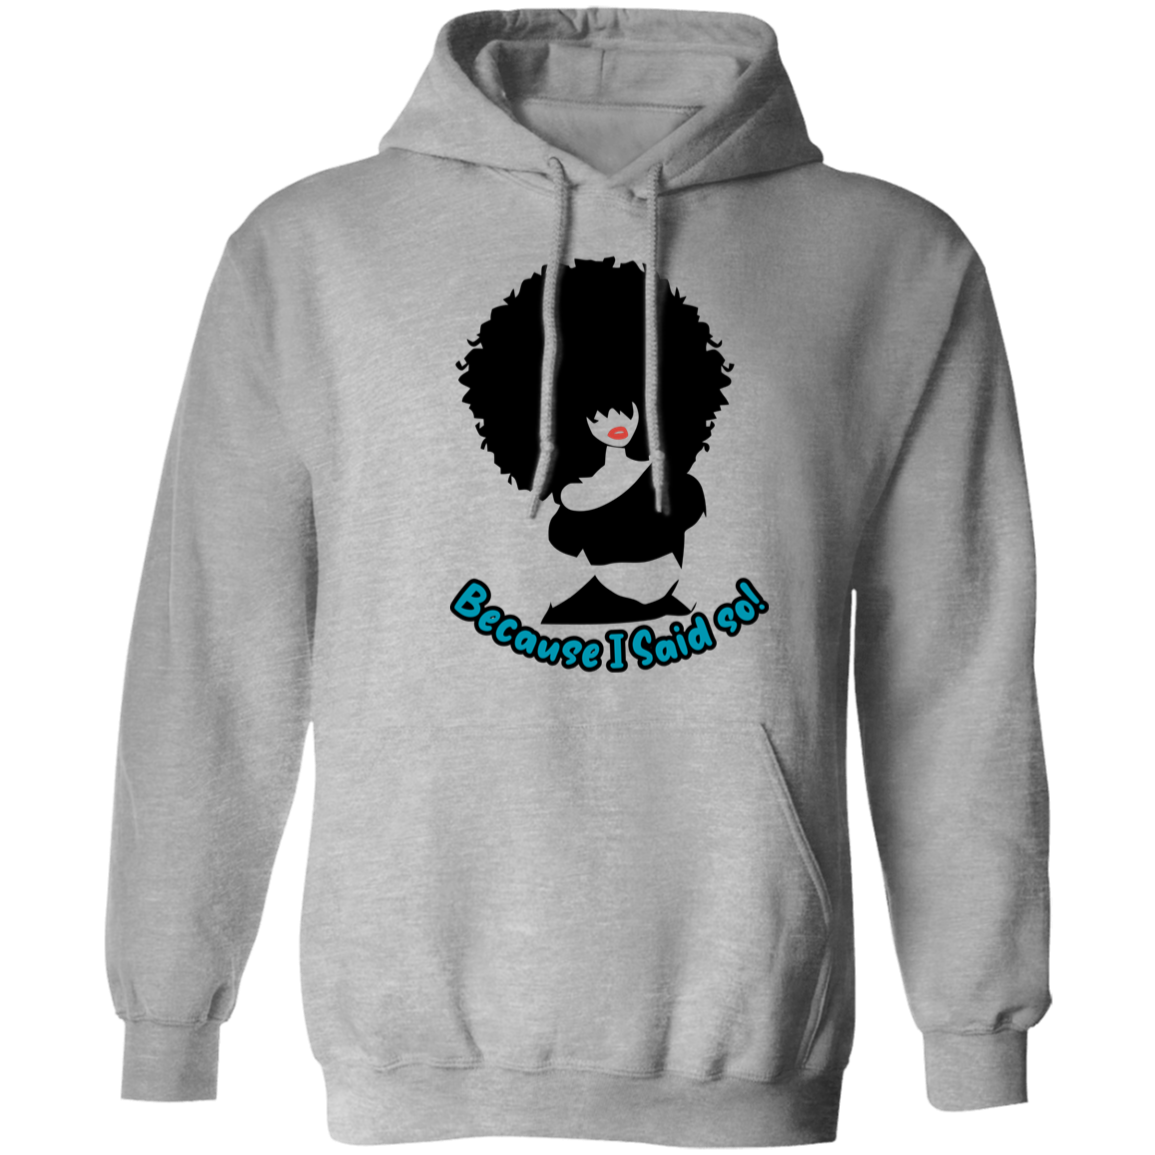 Because i Said So Pullover Hoodie